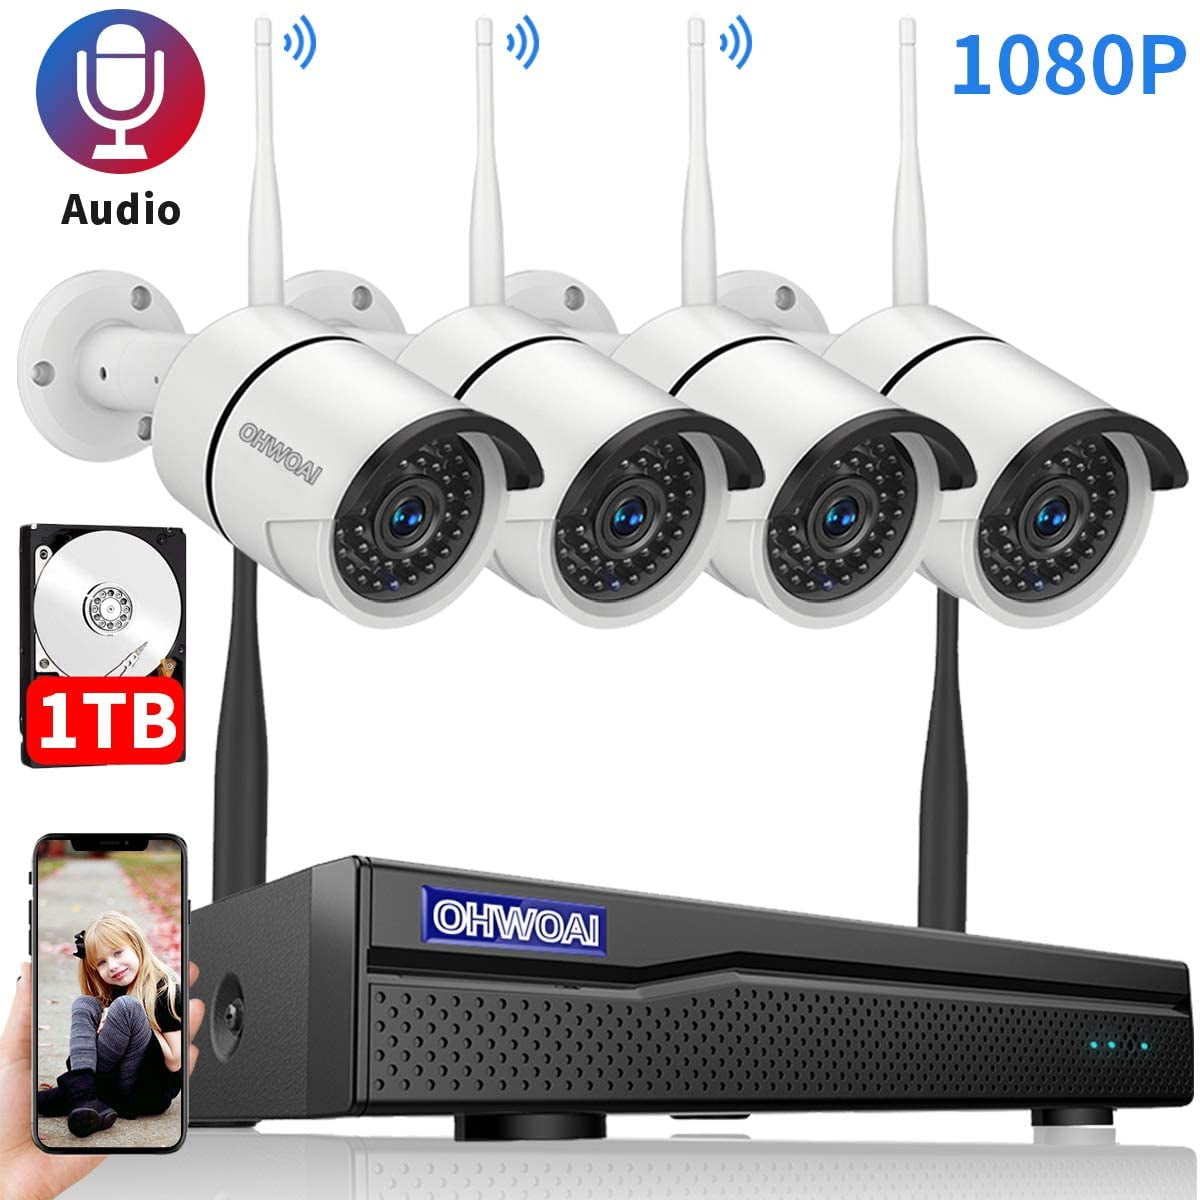 Wireless Security Camera System,OHWOAI Home Surveillance Cameras System, 8CH NVR and 4pcs Indoor